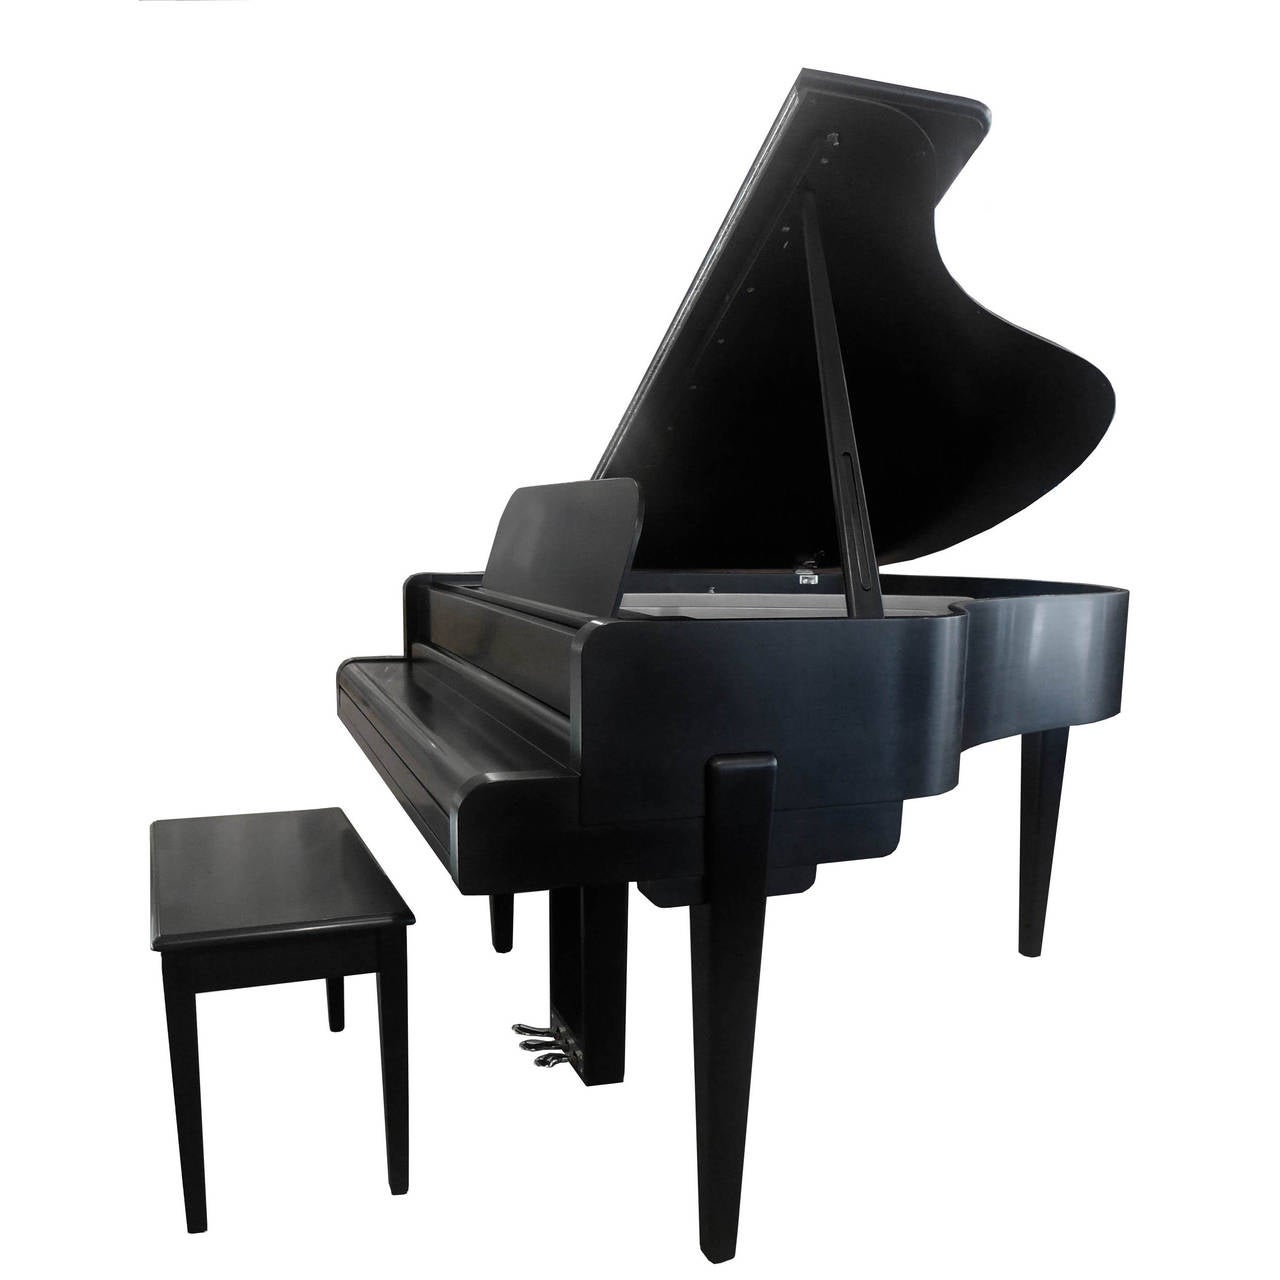 Fantastic streamline Steinway model M baby grand piano. It was the more popular of two models that Teaque designed for Steinway in 1938. Every detail is an ode to streamline modern design. The finish is a satin black and the keys are the original